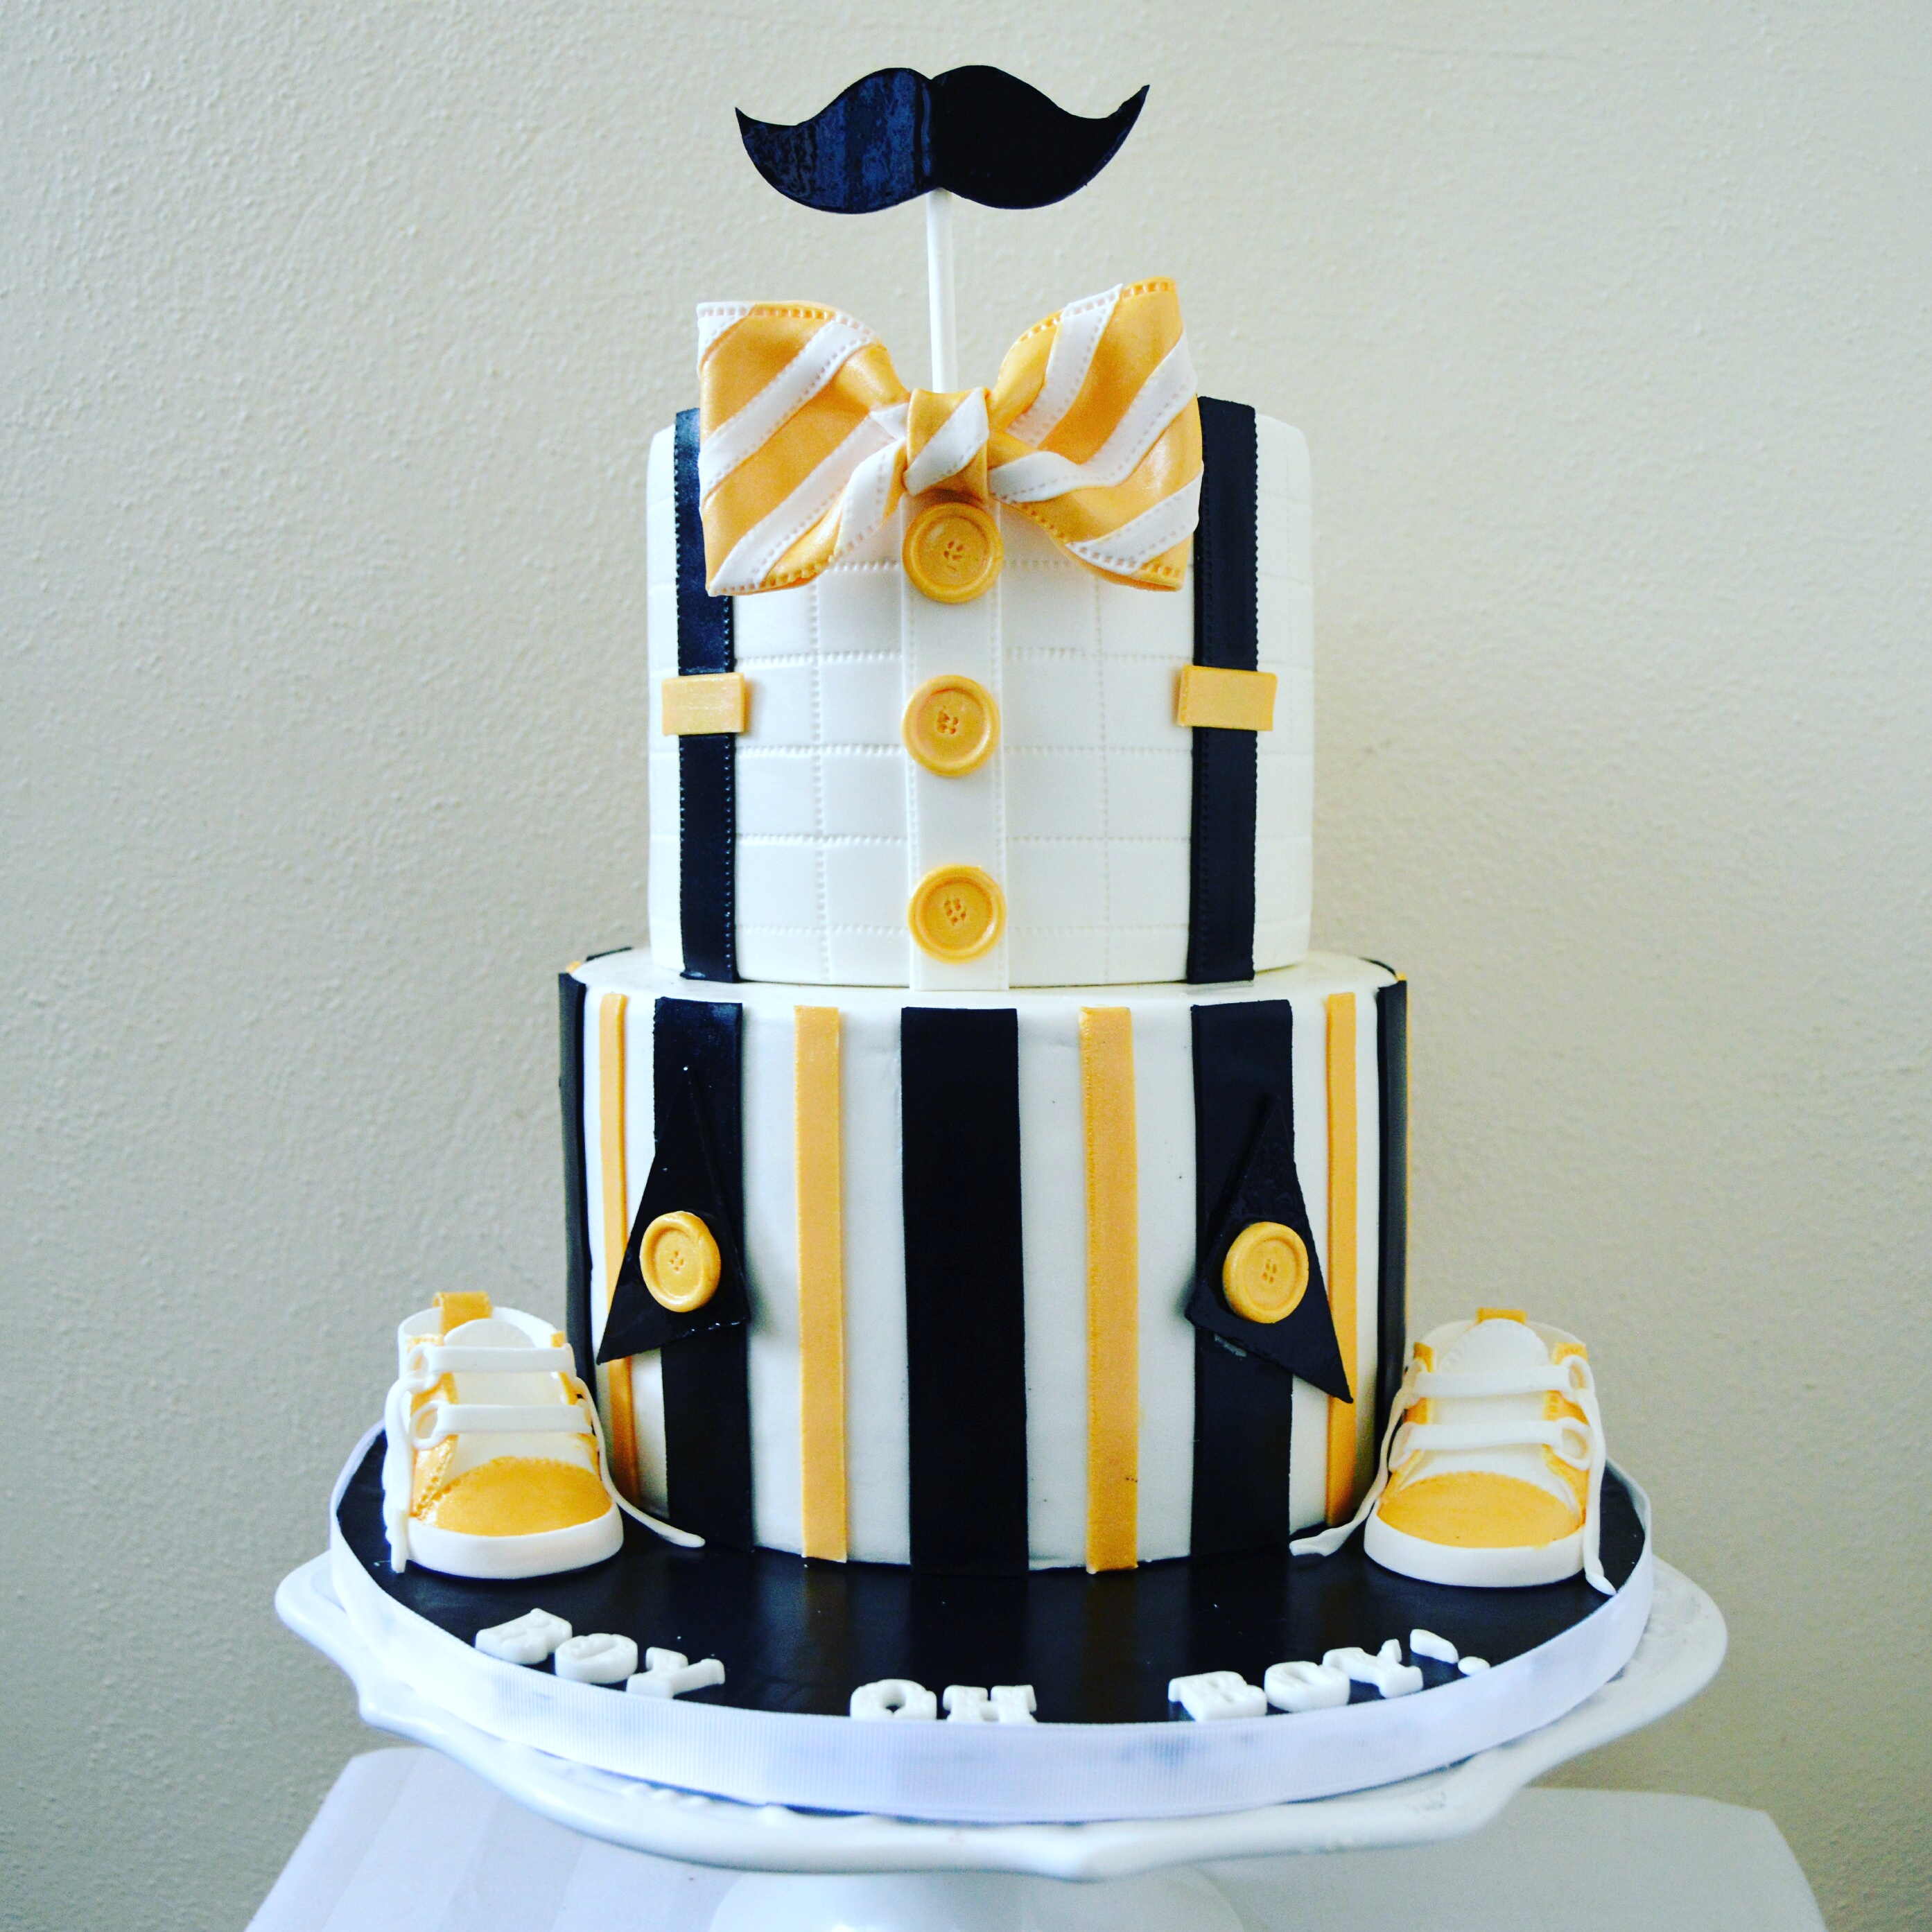 How to Make Vertical Fondant Stripes on Cakes